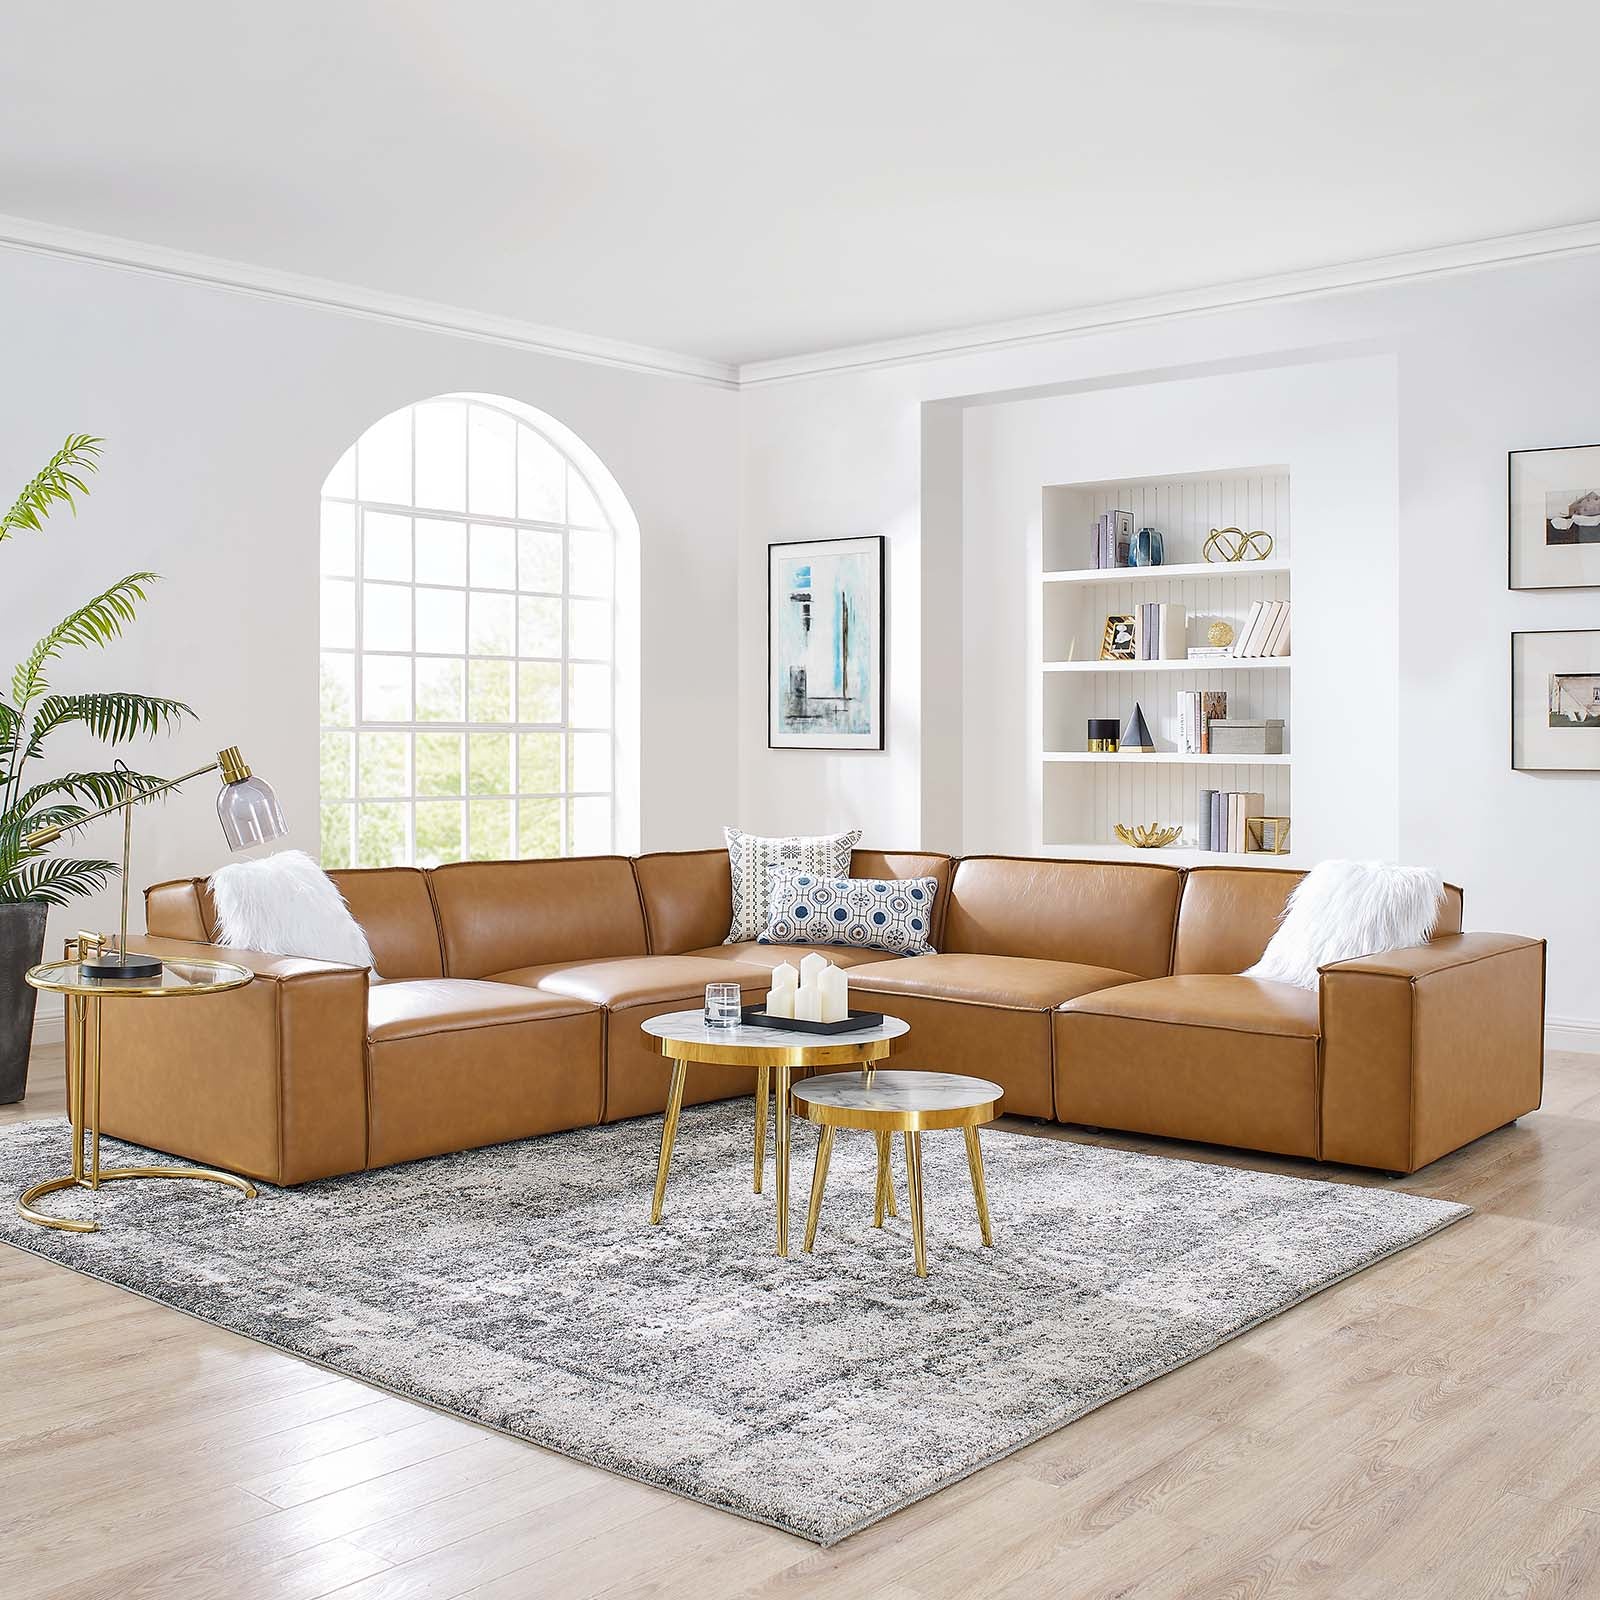 Restore 5-Piece Vegan Leather Sectional Sofa - East Shore Modern Home Furnishings